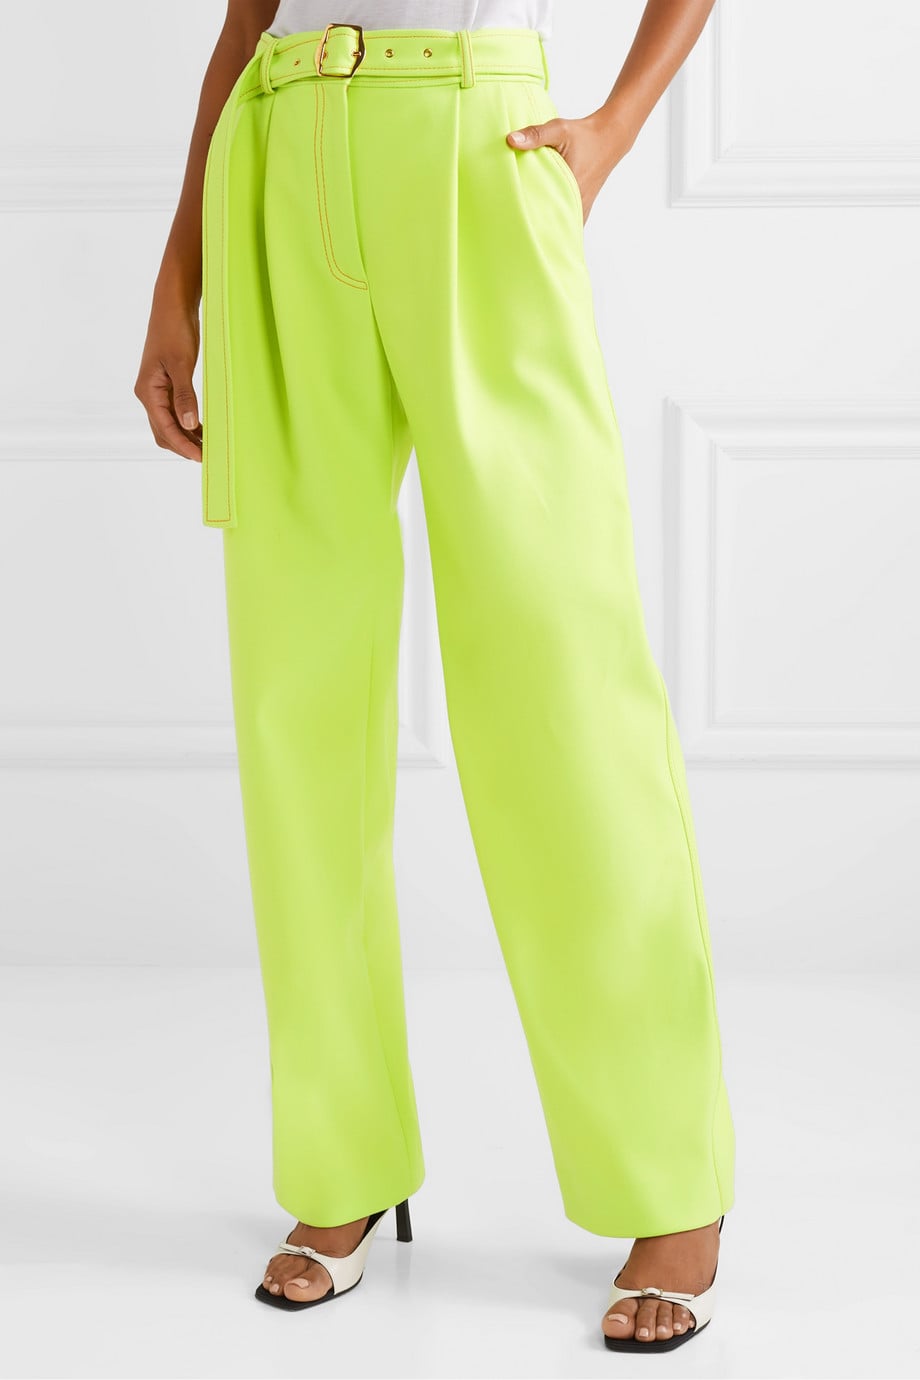 Sies Marjan Blanche belted pleated twill wide-leg pants | 7 Fall 